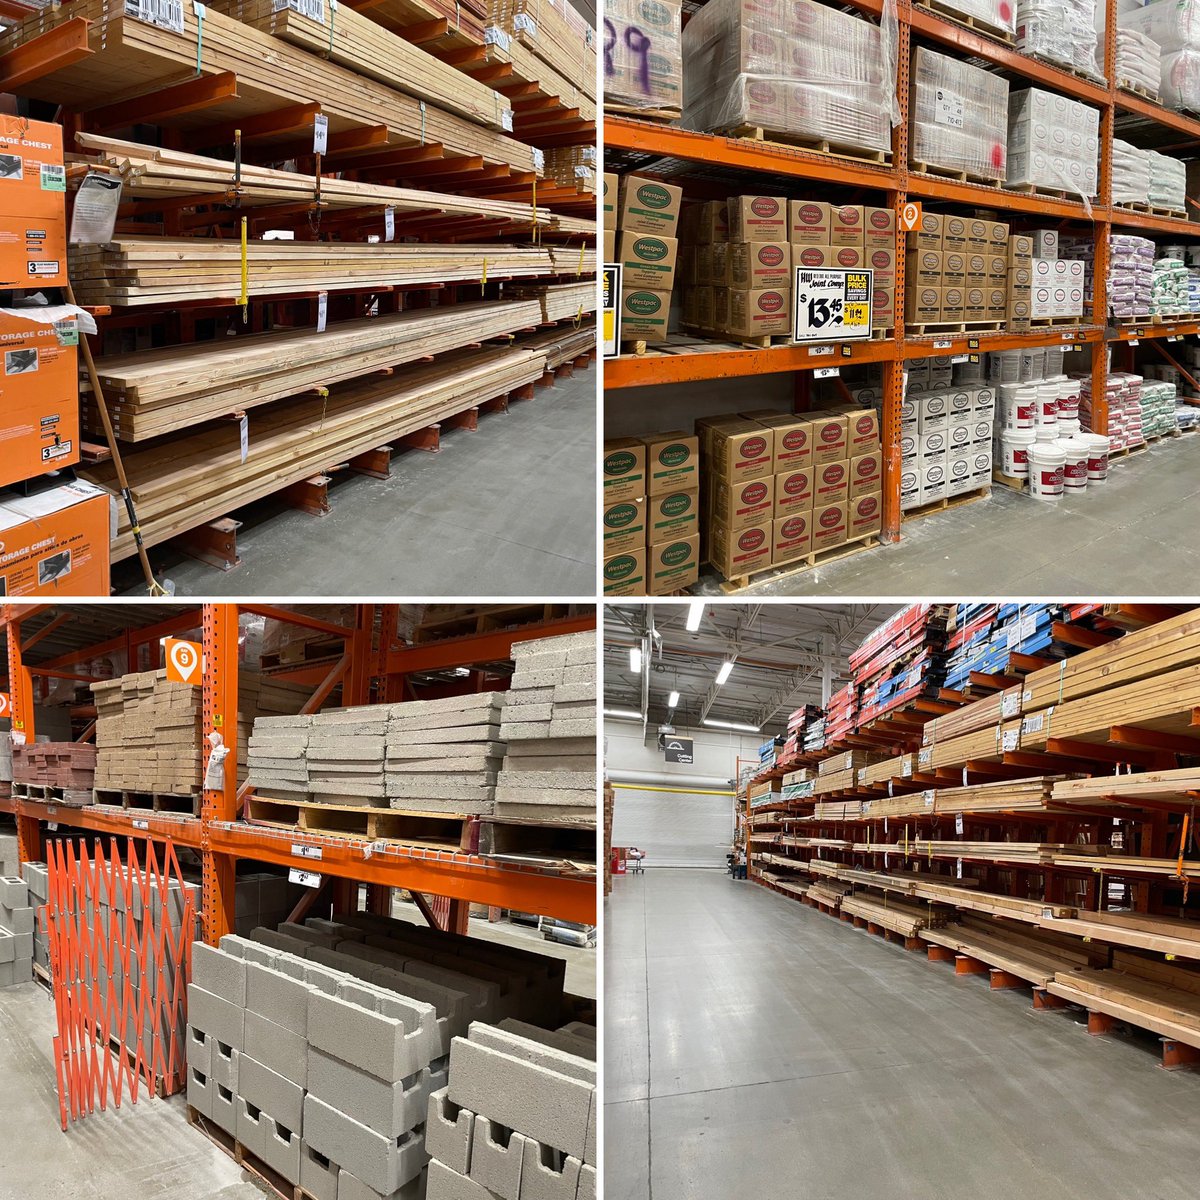 Lights out! Driving those D21/22 Standards @ TheRanch #D172 #PacNorthProud